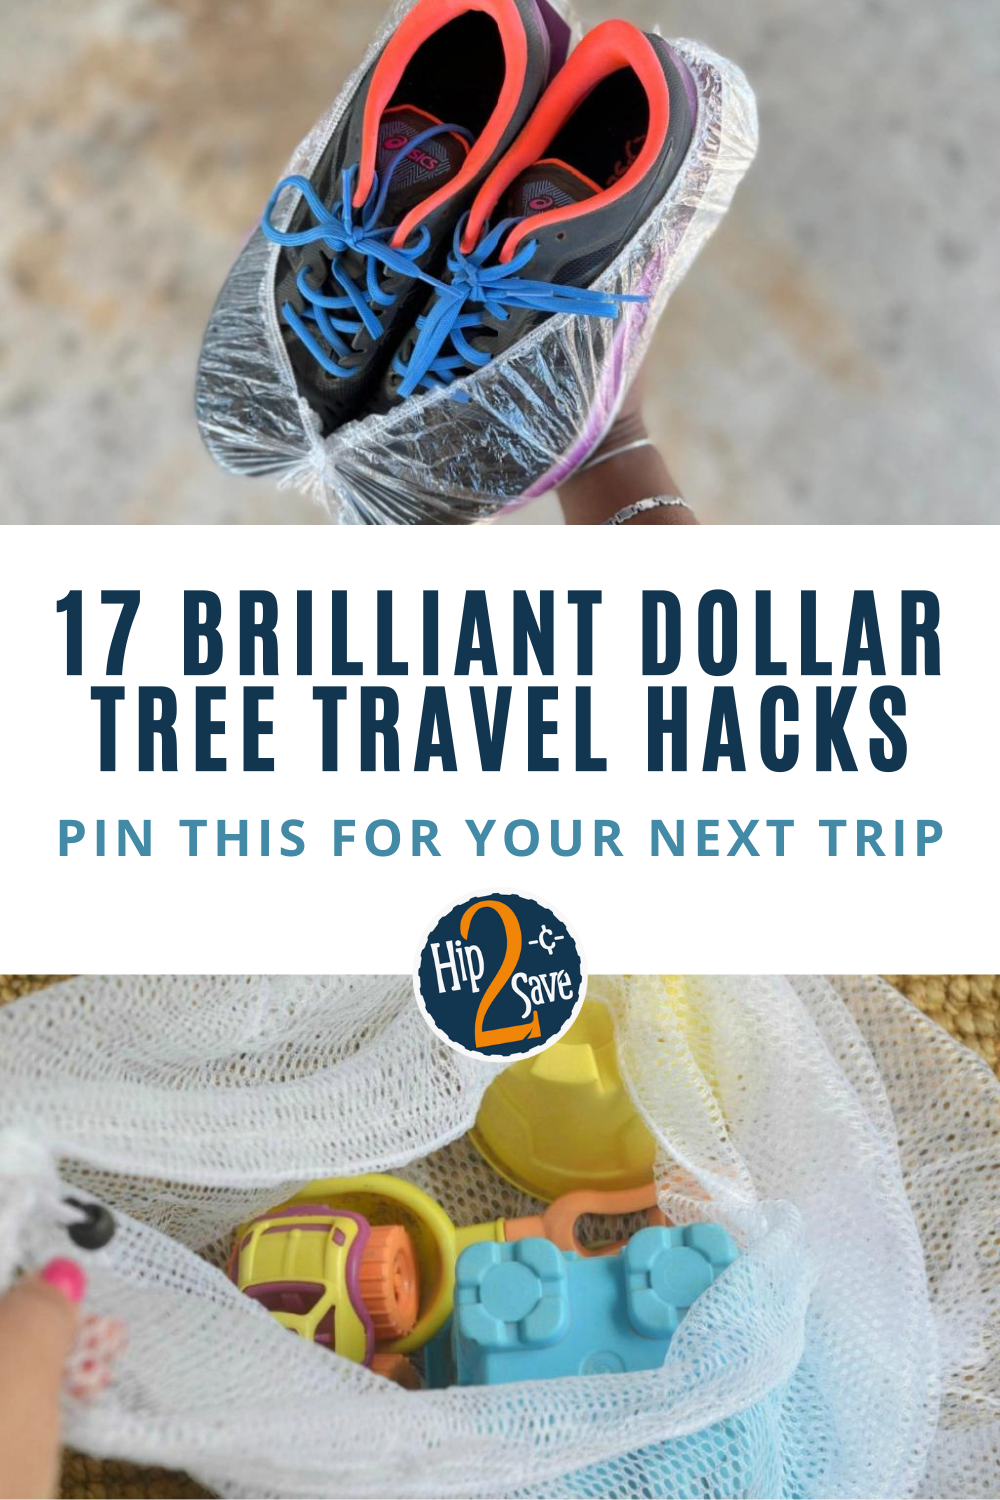 25 Dollar Tree Travel Items You Never Knew You Needed!